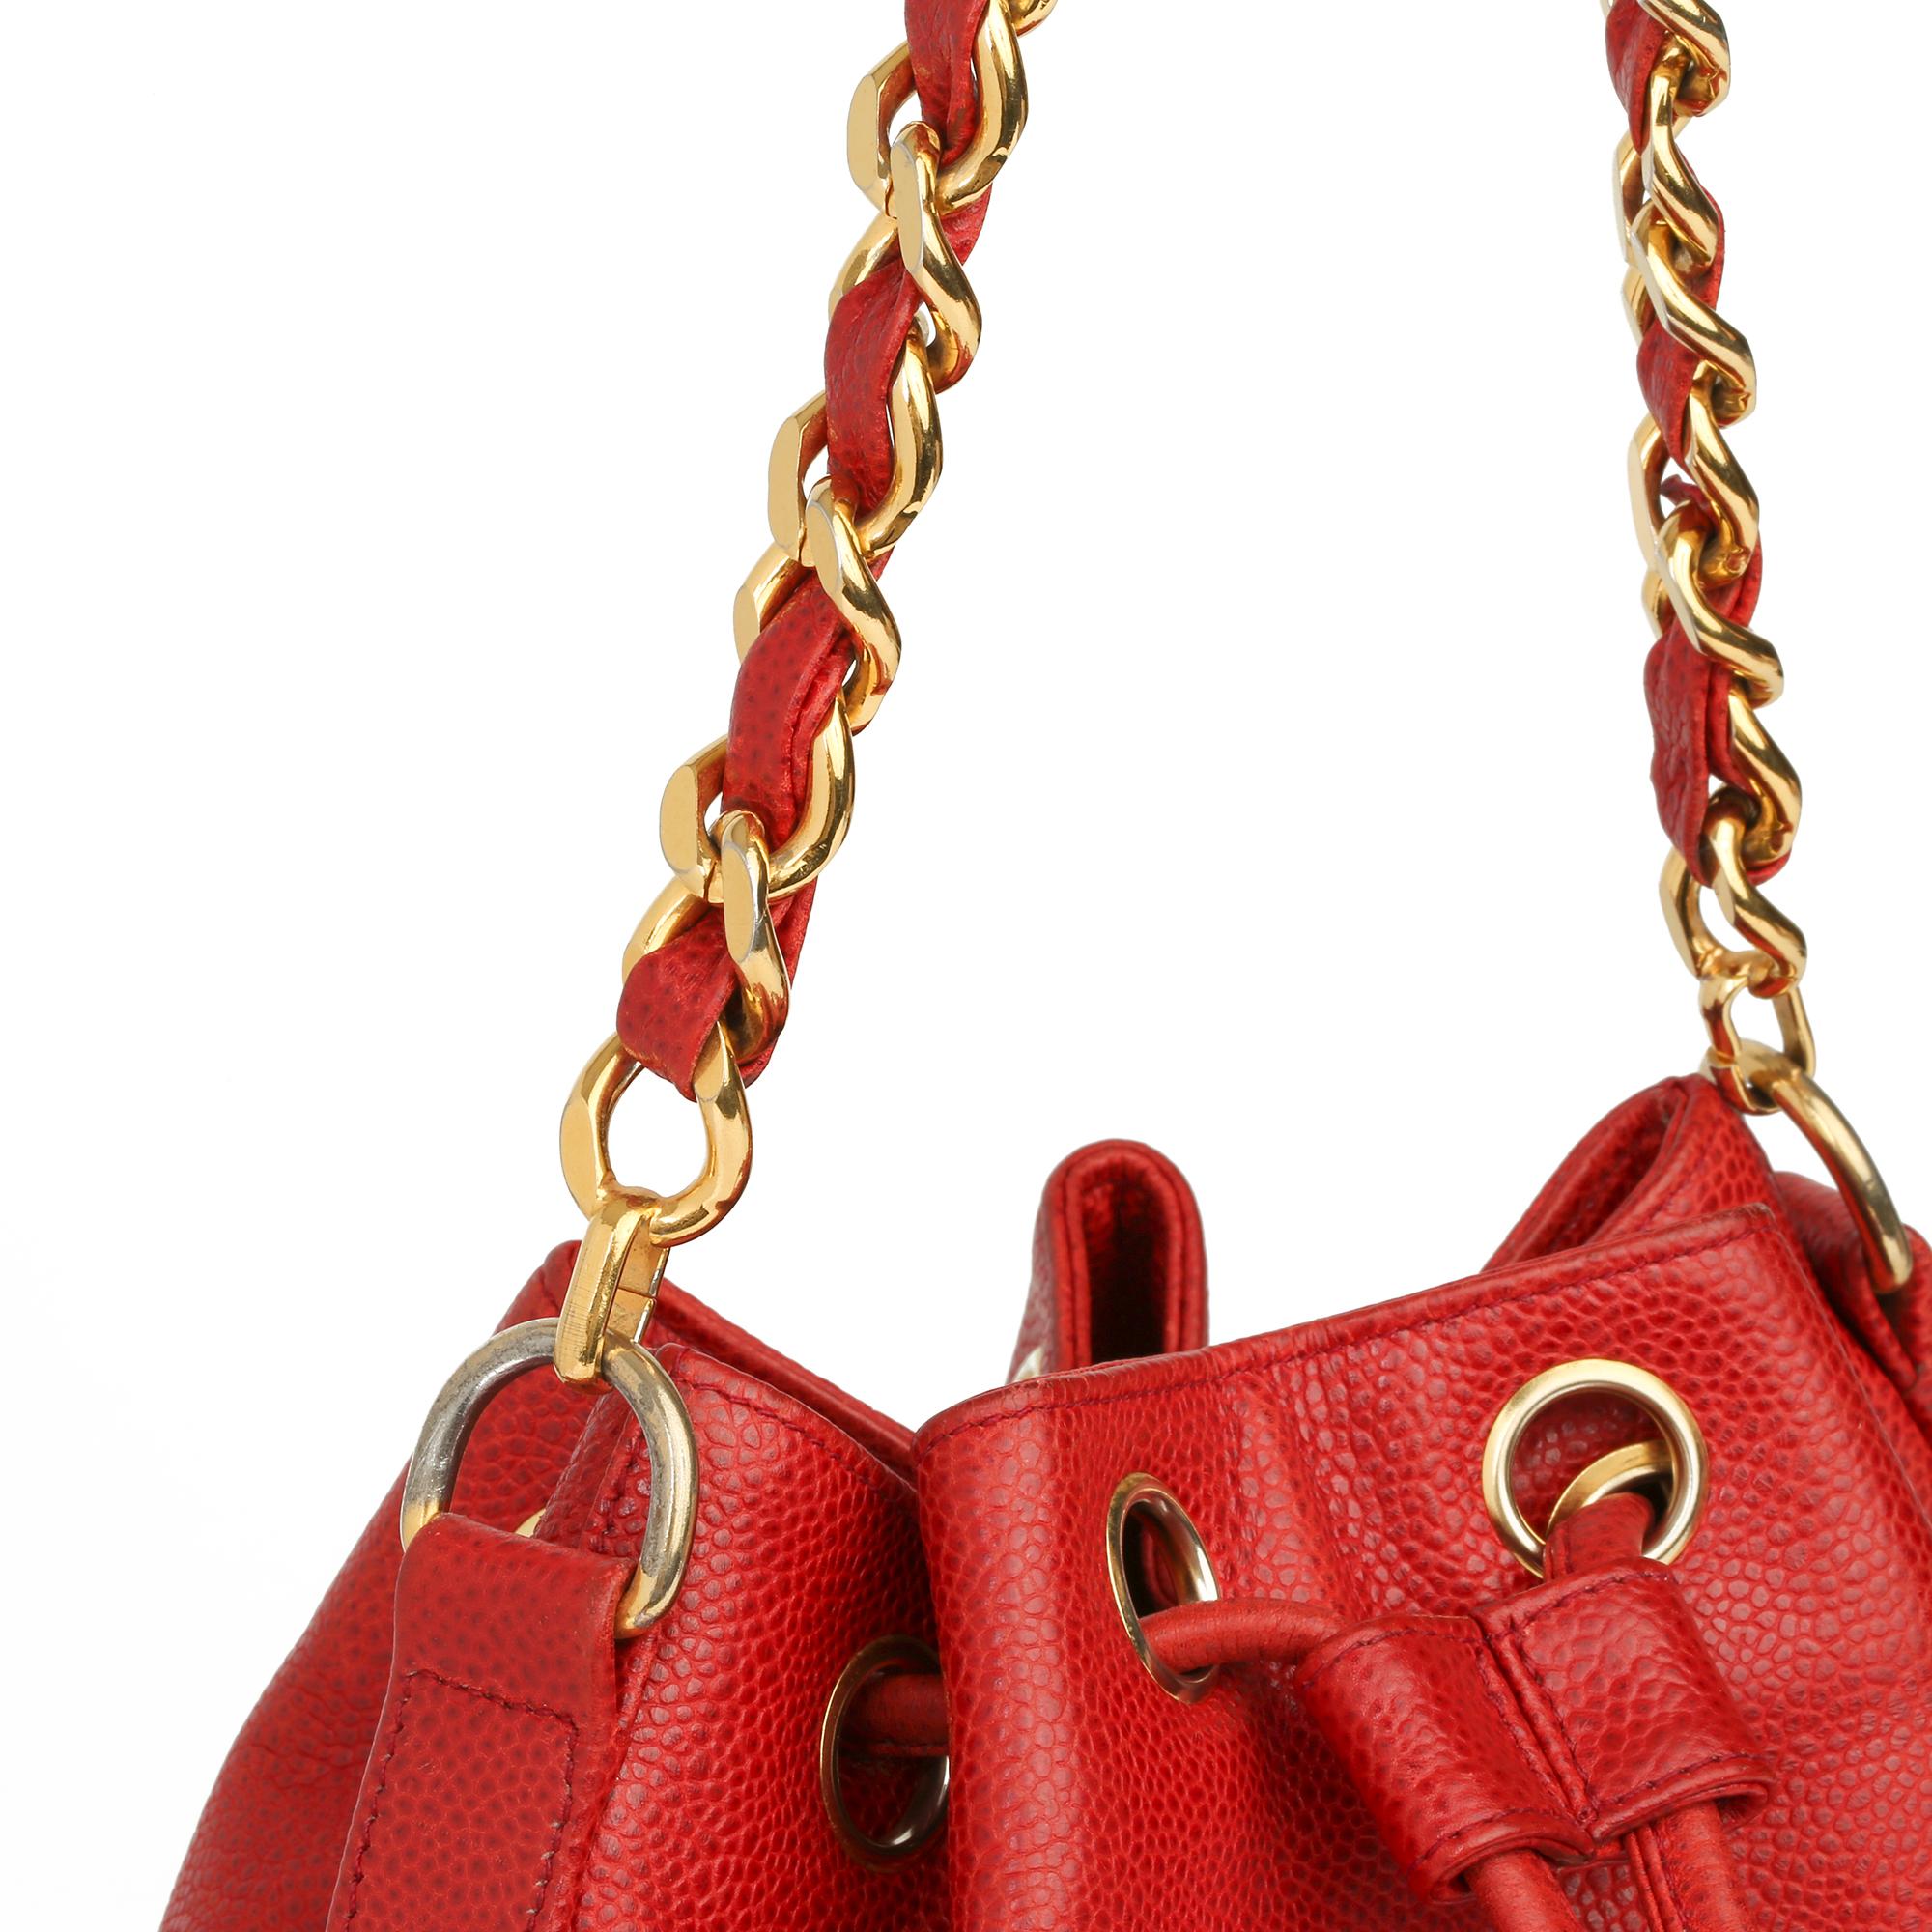 Chanel Red Caviar Leather Vintage Timeless Bucket Bag with Pouch 1